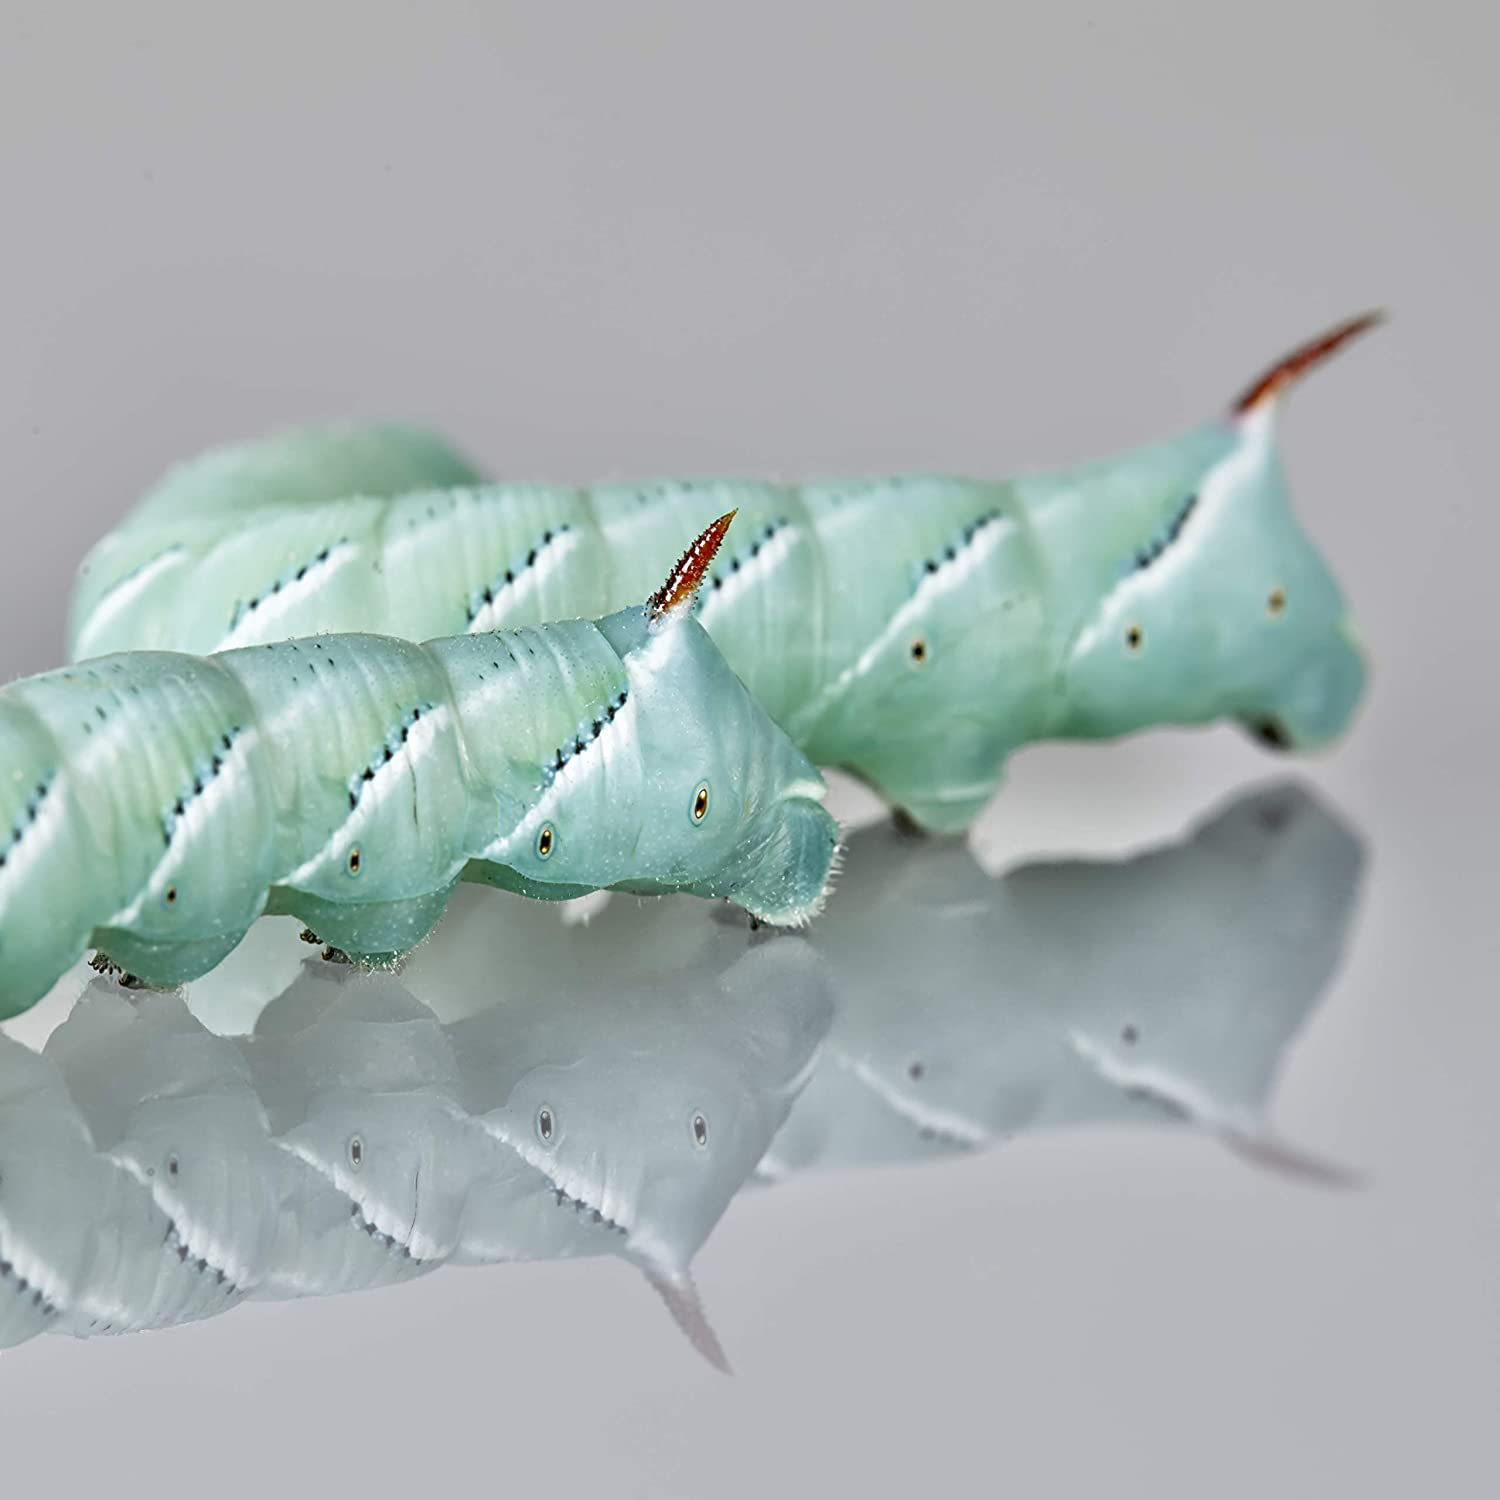 Dbdpet Premium 70+ Live Hornworms (3 Cups of 24-30Ct) - Food for Bearded Dragons, Leopard Geckos, Frogs, Chameleons, Tegus, and Other Reptiles! Animals & Pet Supplies > Pet Supplies > Reptile & Amphibian Supplies > Reptile & Amphibian Food DBDPet   